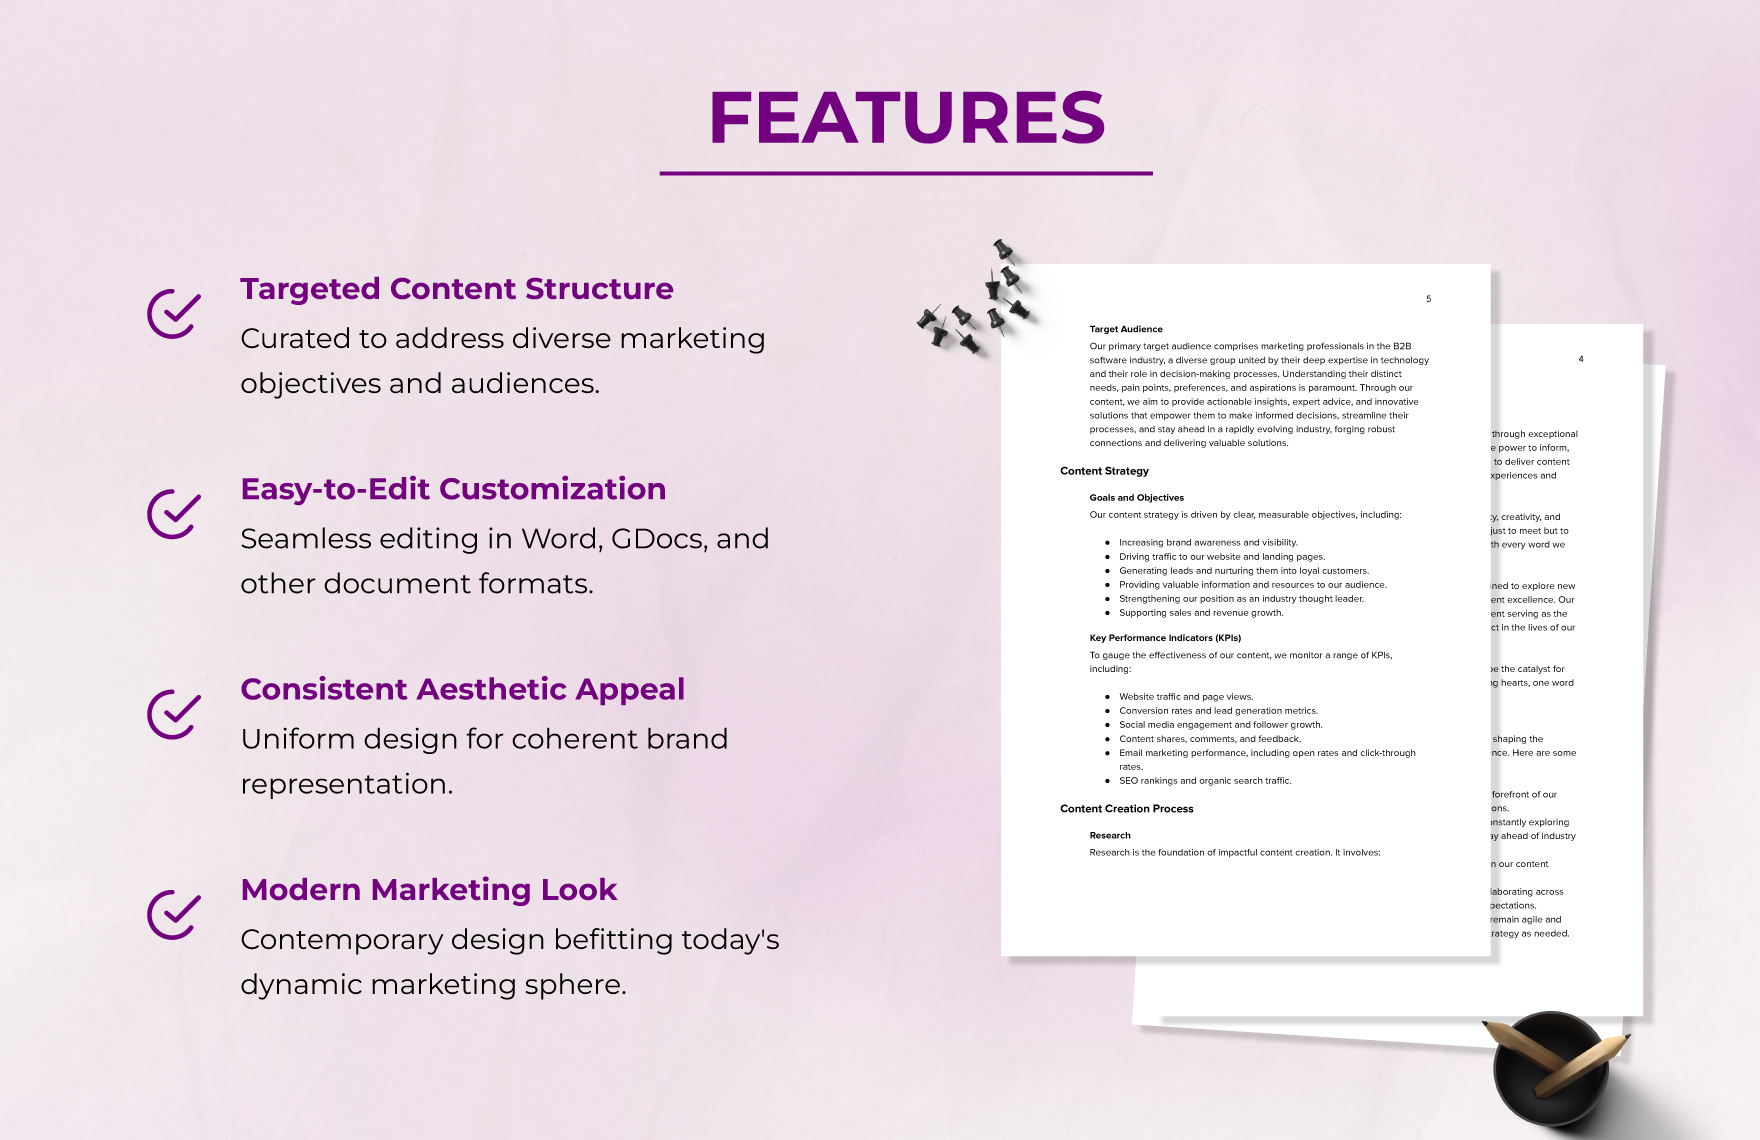 Marketing Content Training Manual Template